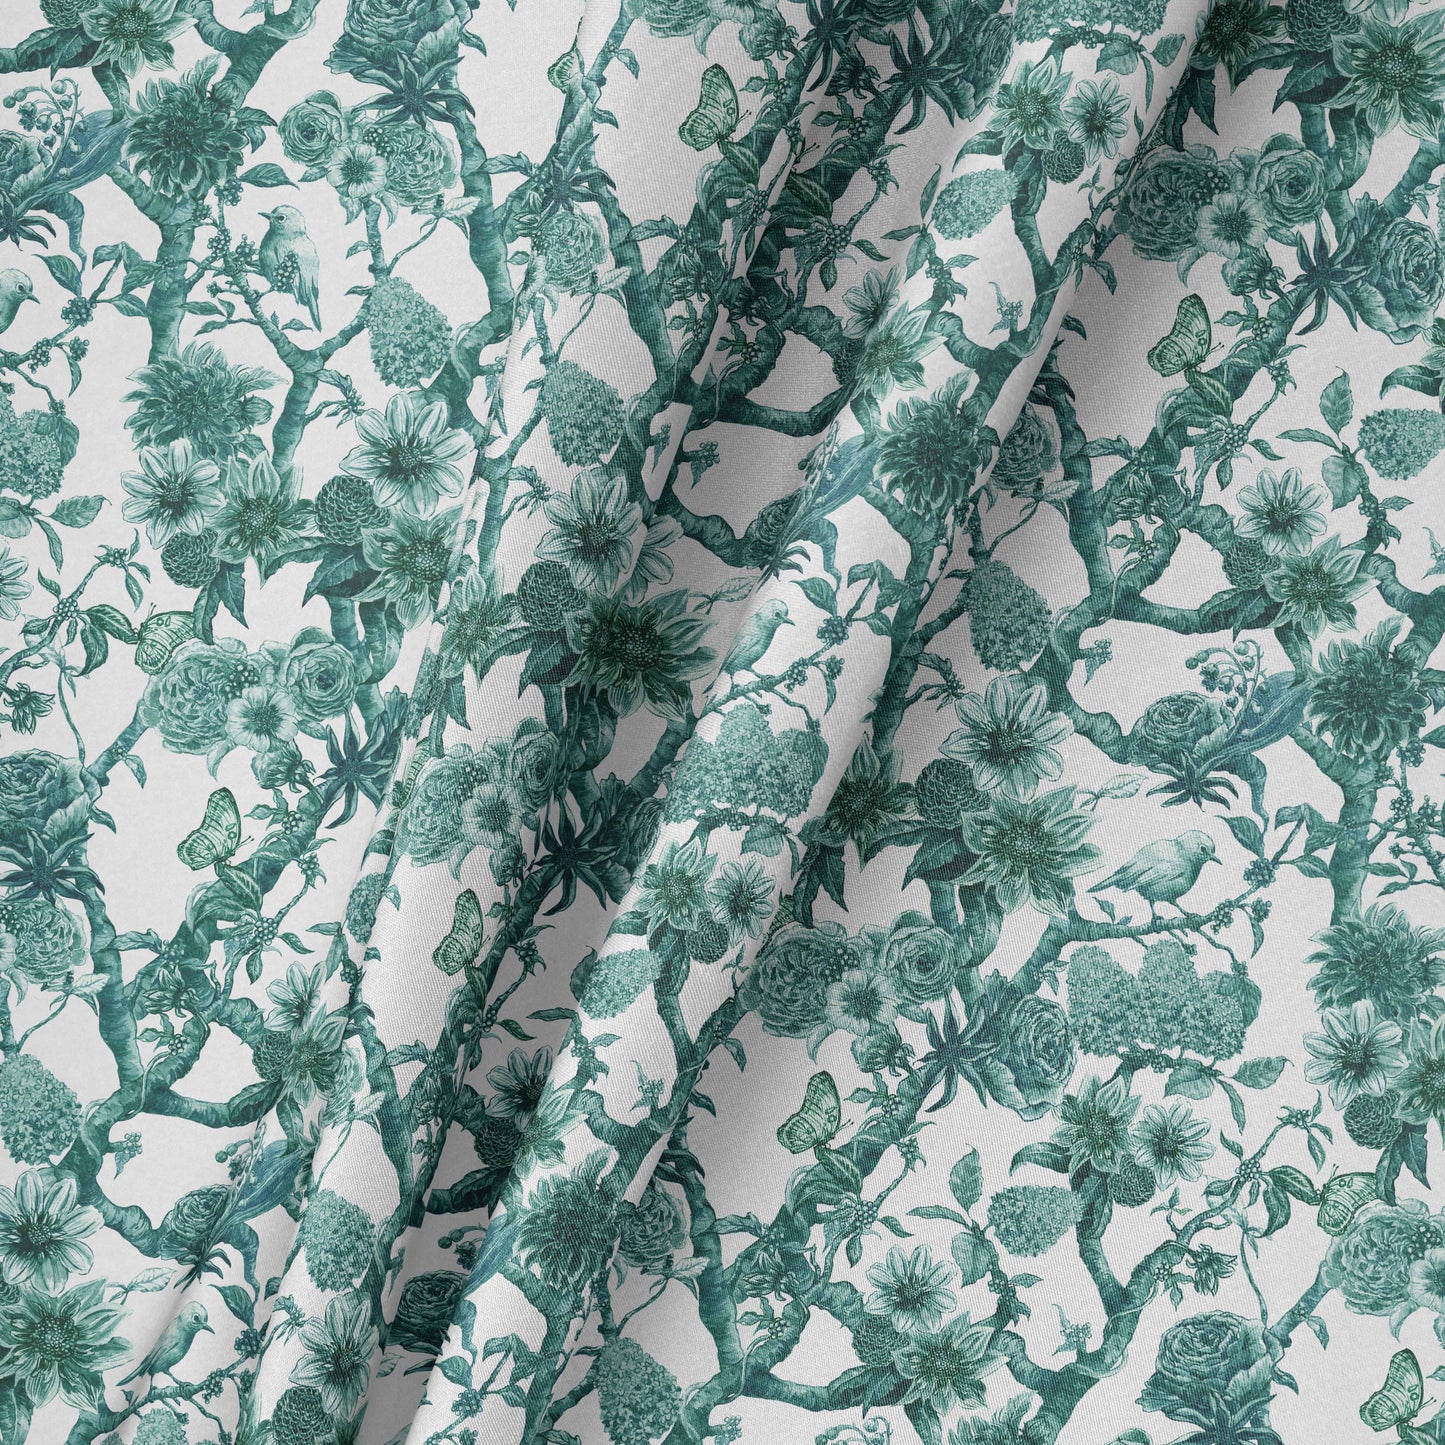 Chinoiserie Garden in Teal